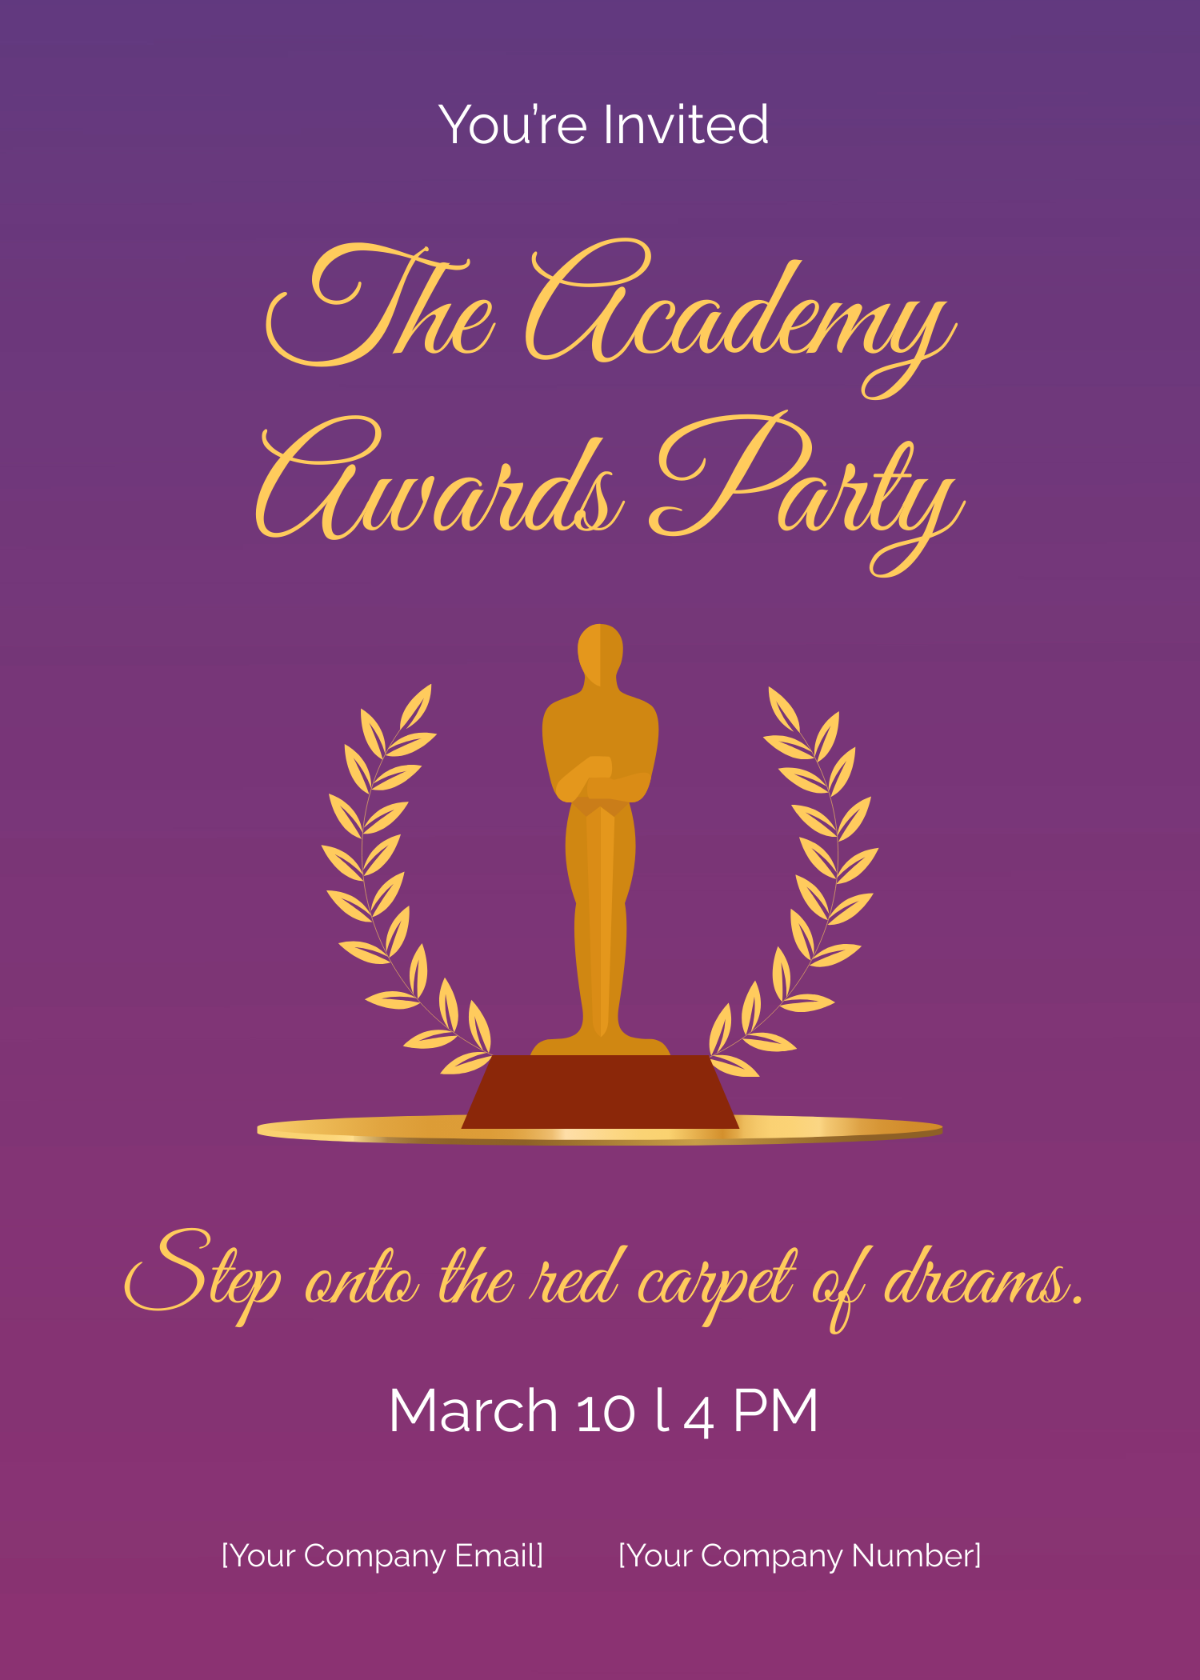 The Academy Awards Party Invitation Template